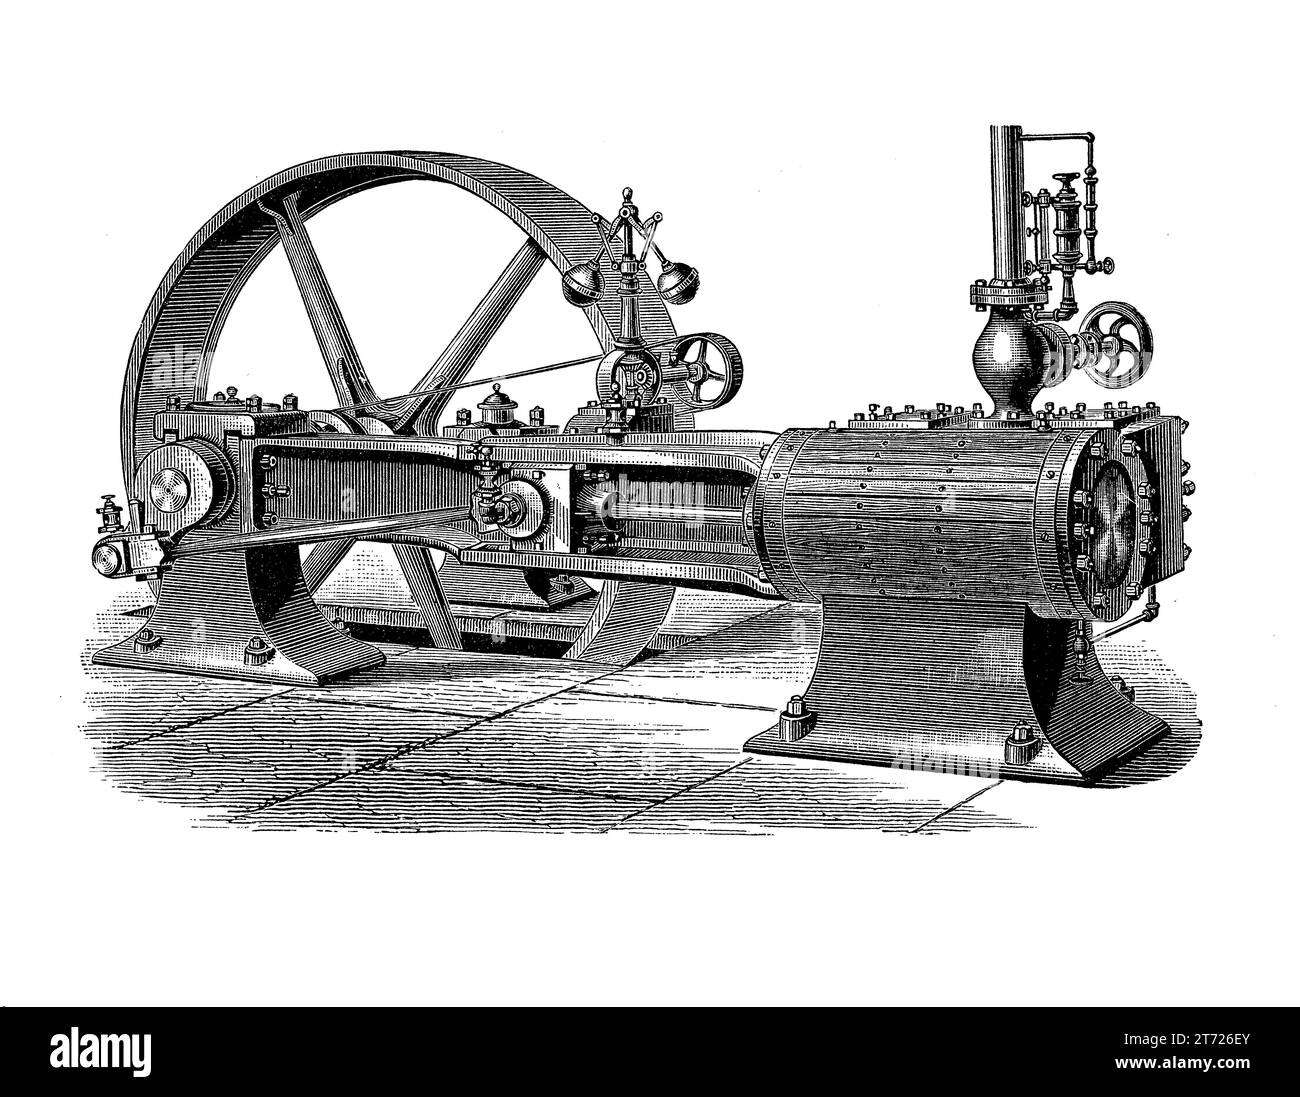 Stationary steam engine to power the factories in the transition of human economy towards more efficient and stable manufacturing processes (18th-19th century) Stock Photo